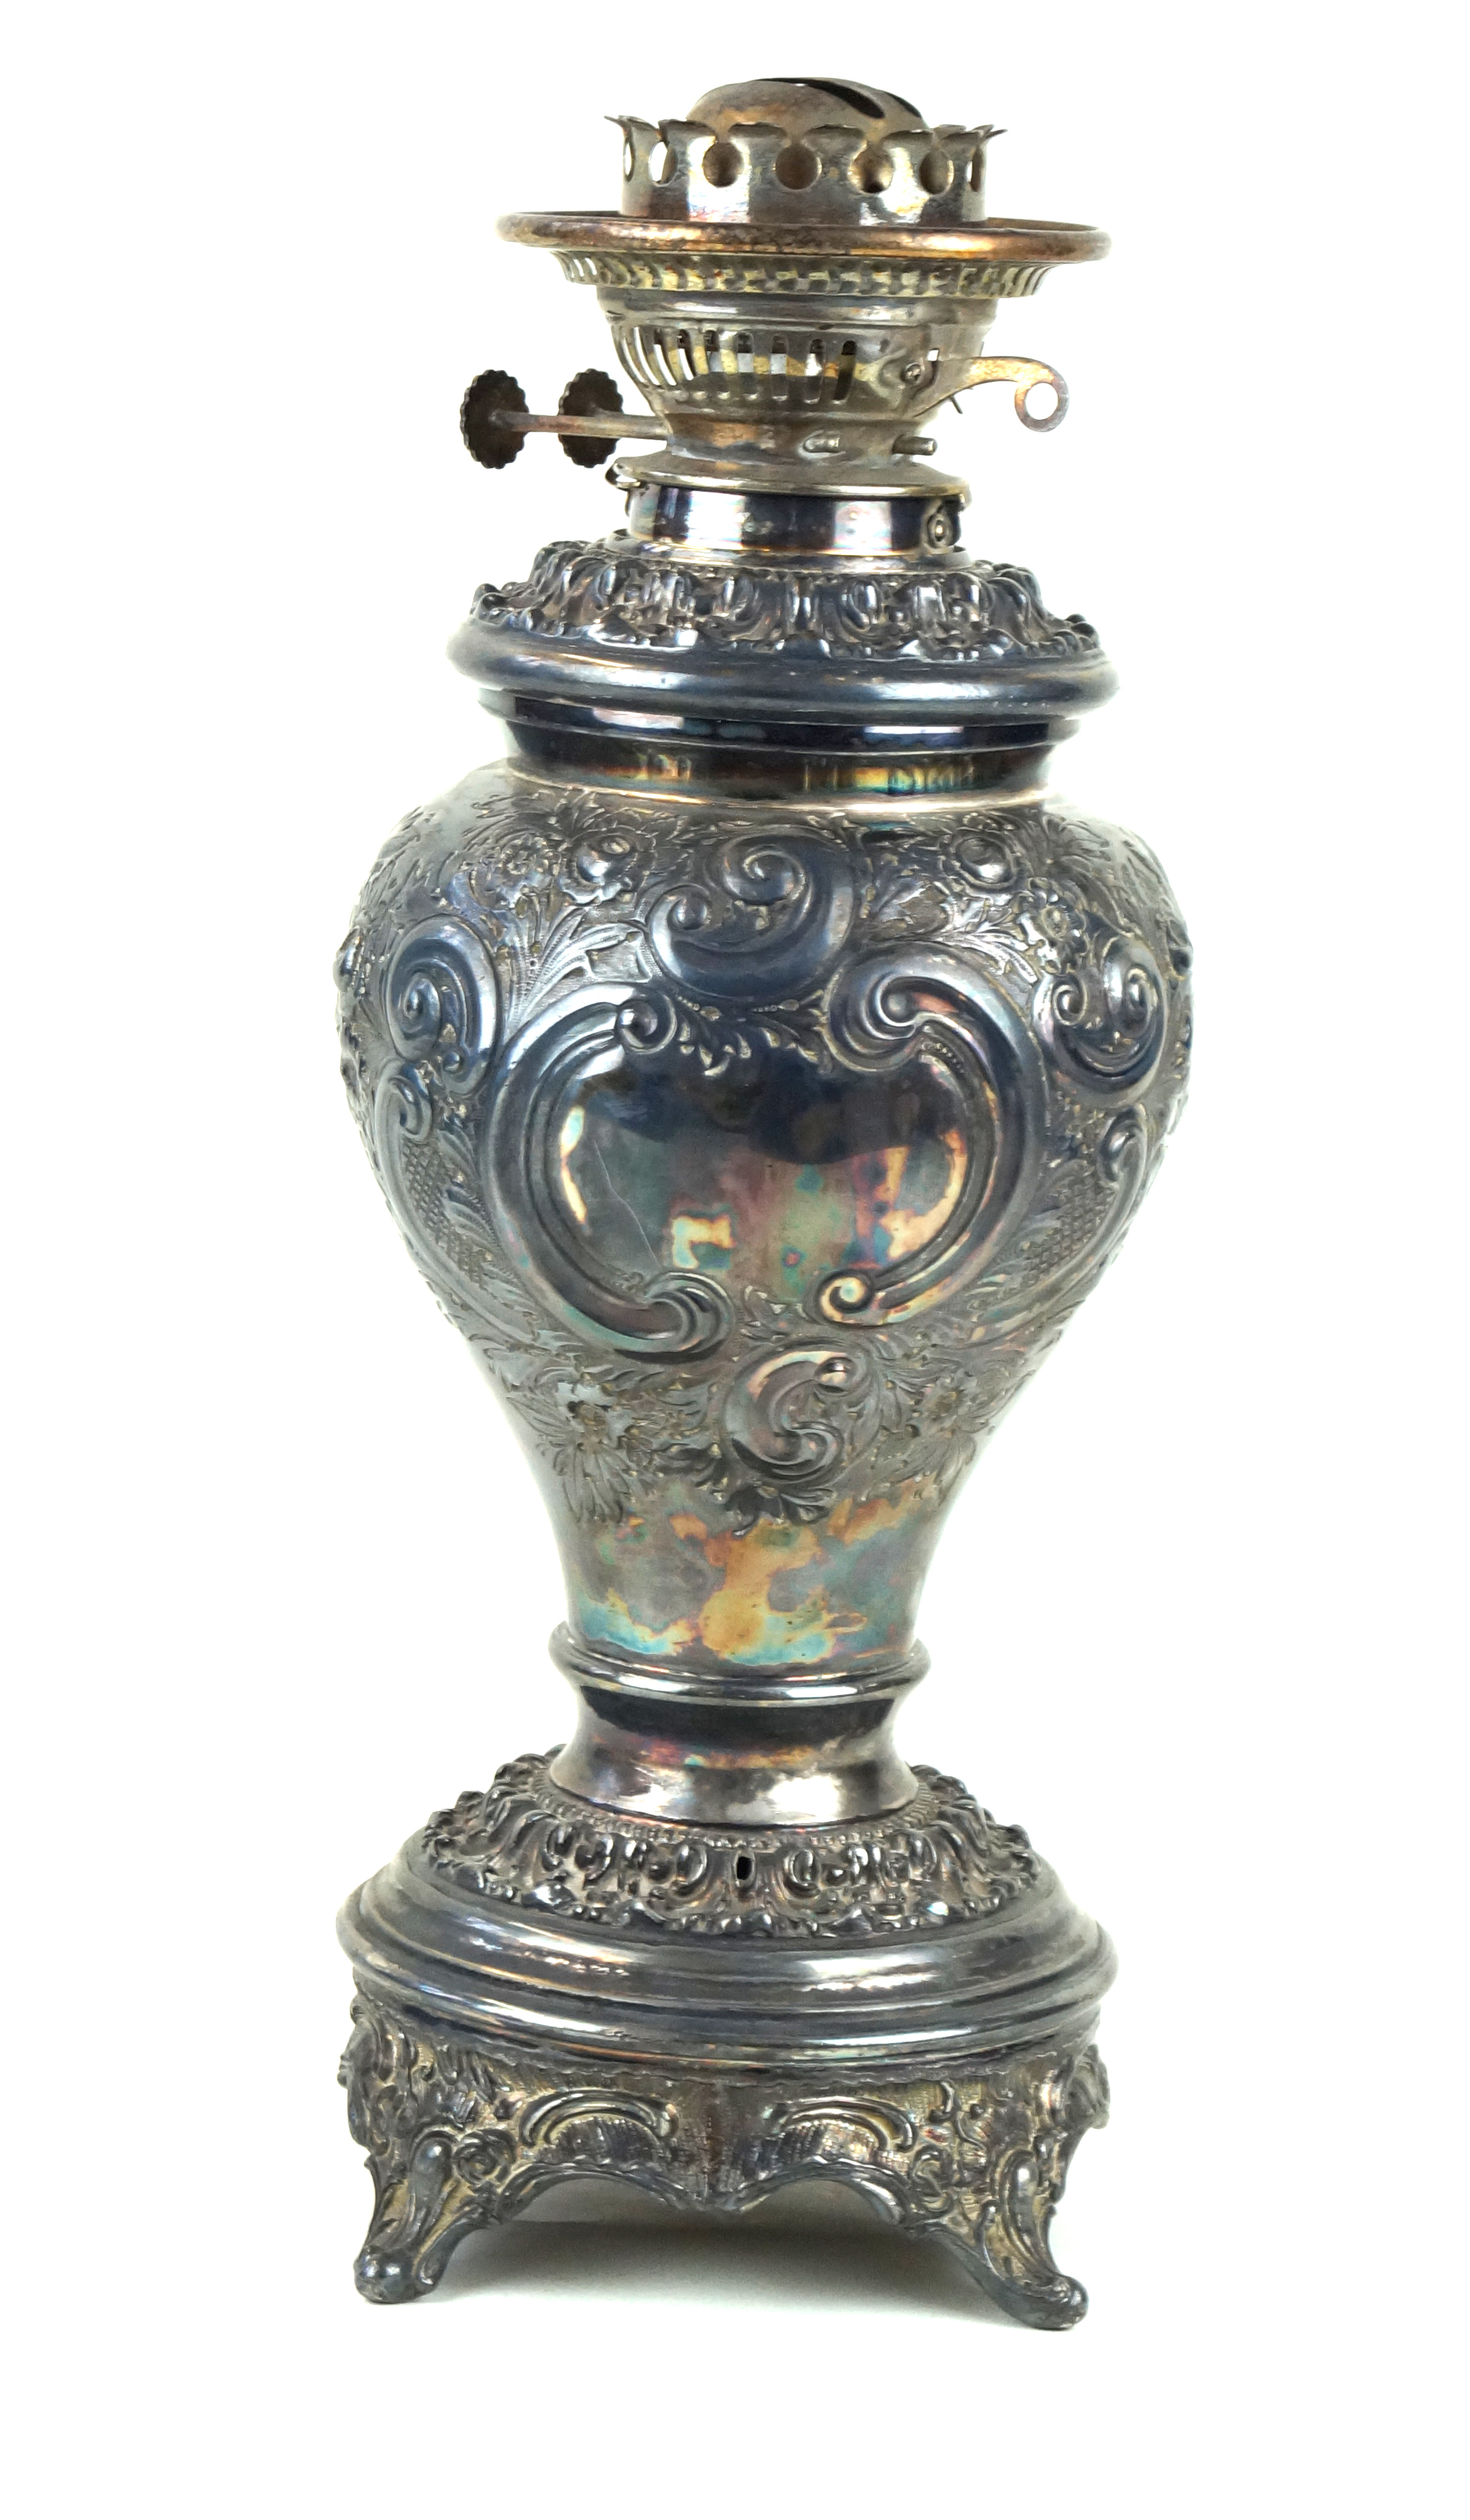 A late 19th/early 20th Century silver-plated paraffin lamp Repousse decorated with scrolls and